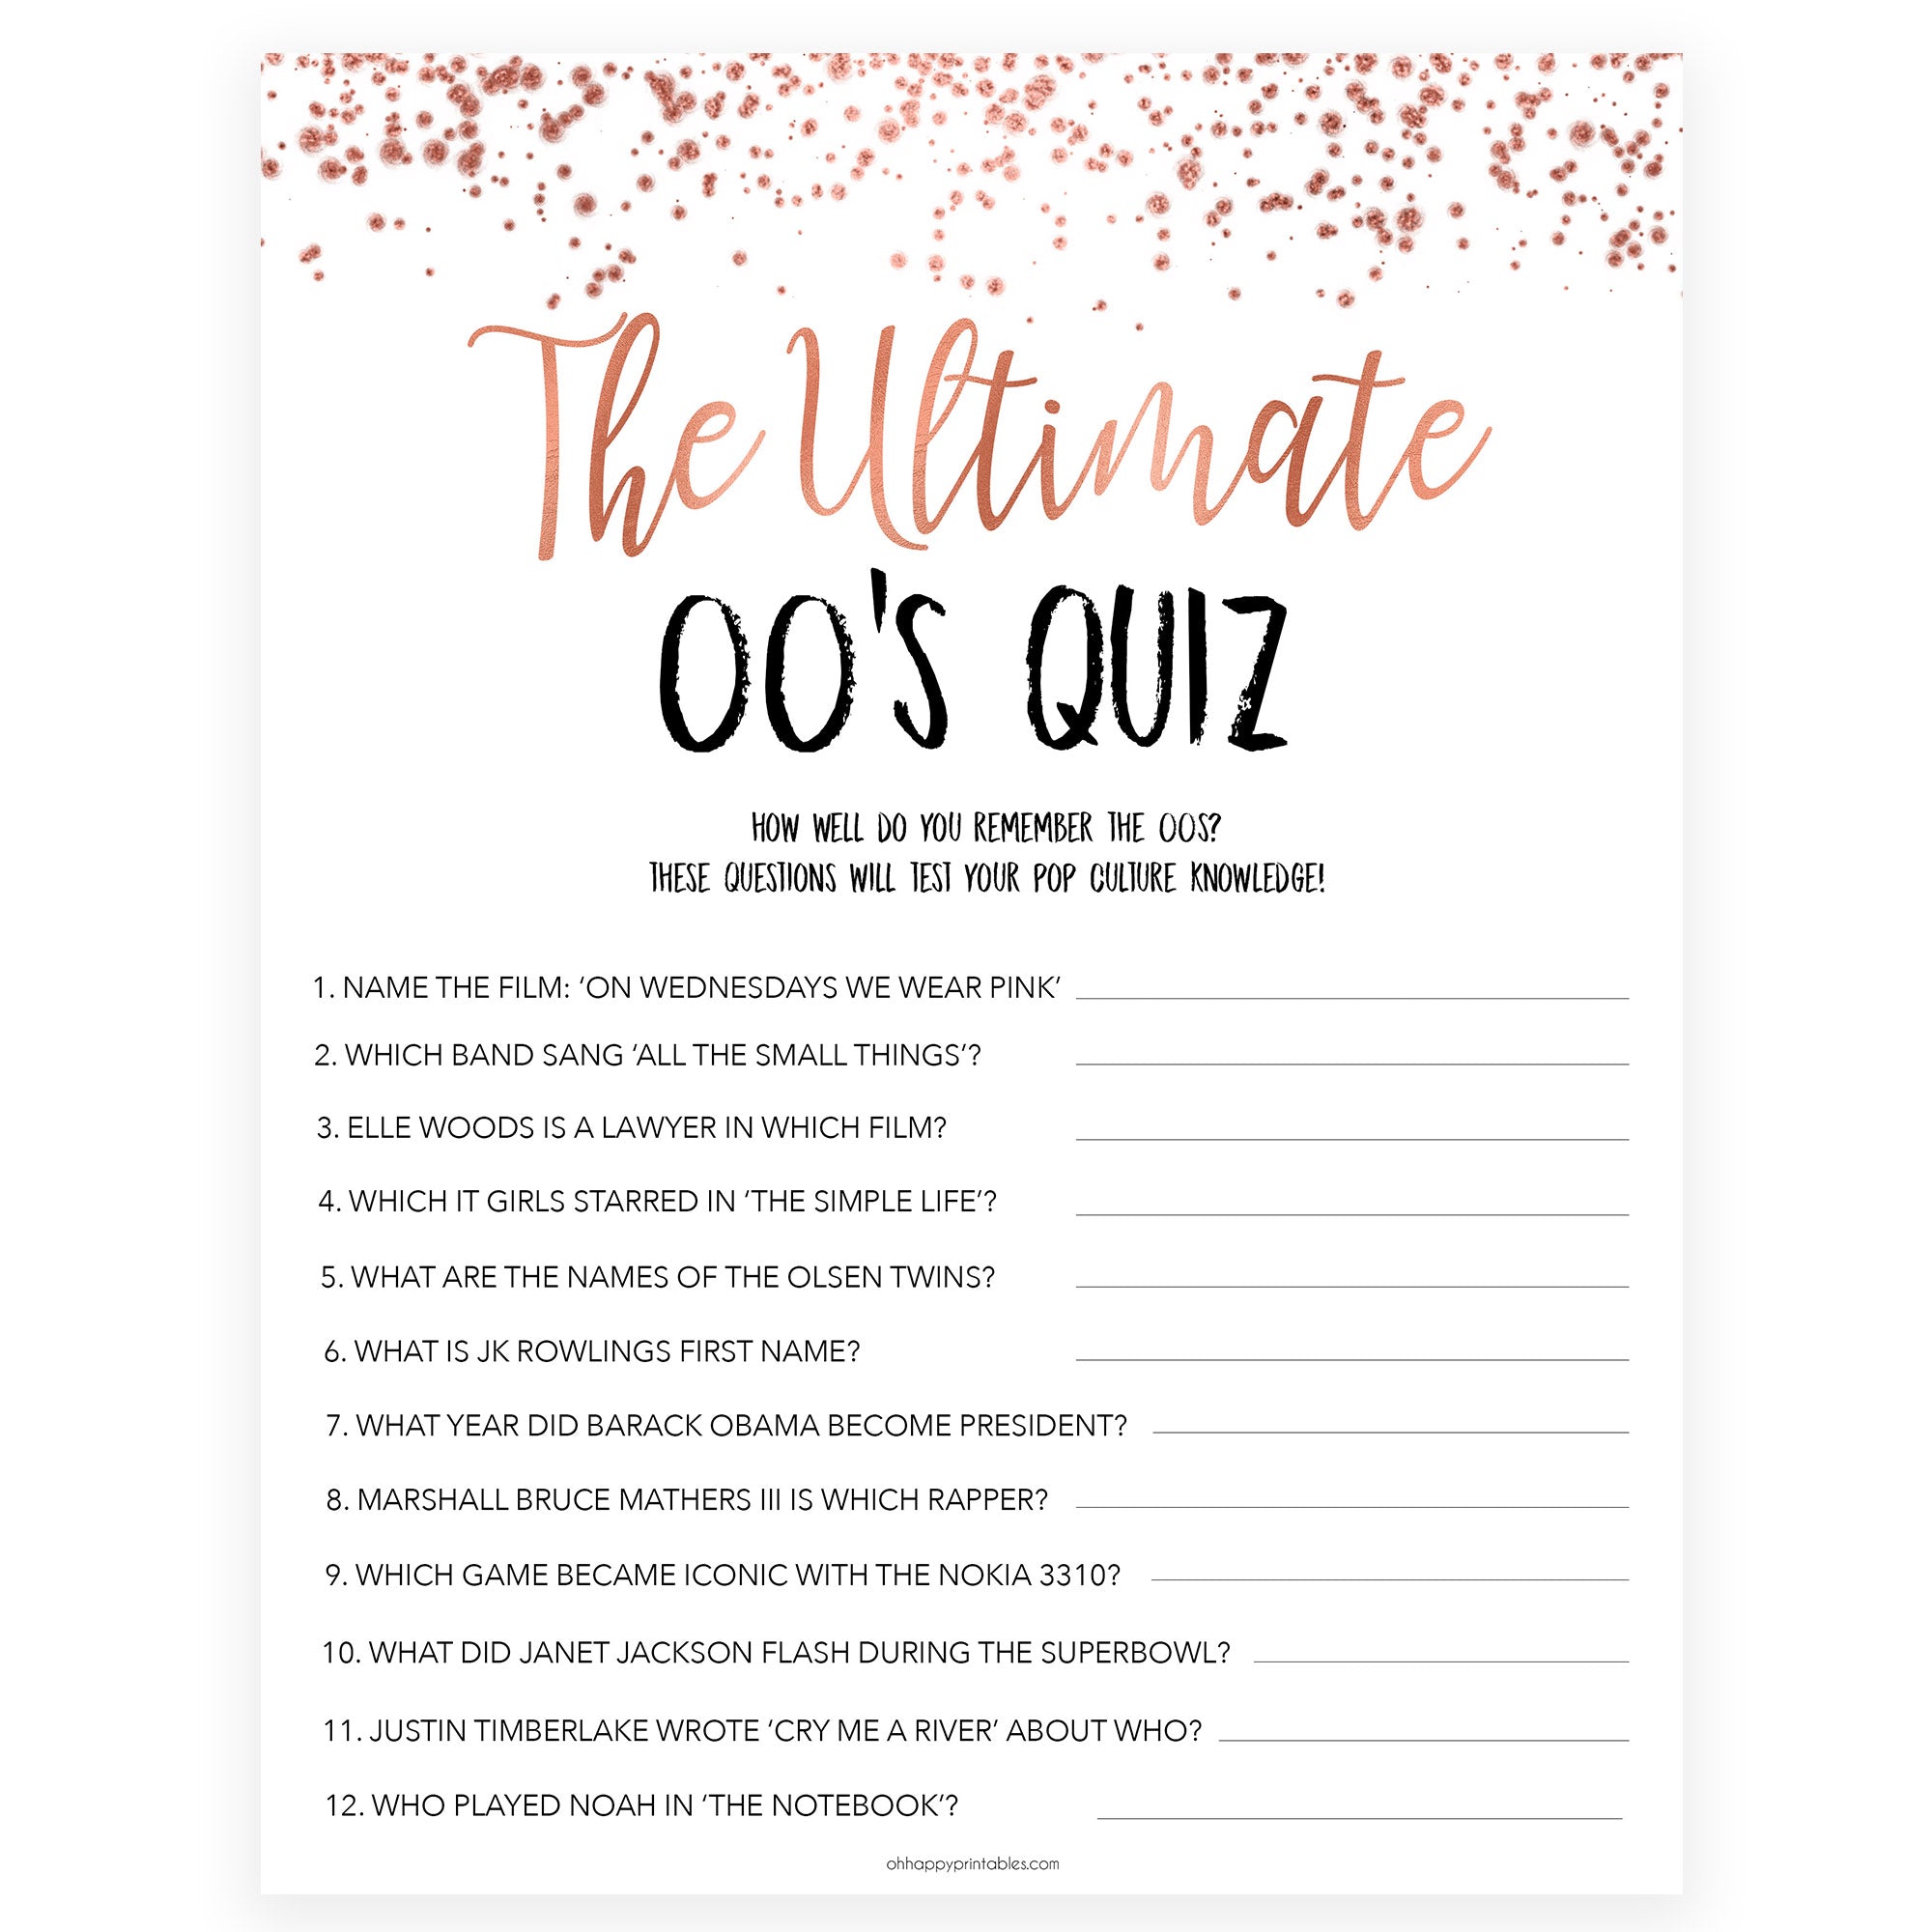 Rose gold bachelorette games, ultimate 00s quiz, bachelorette games, bridal shower games, top 10 baby games, fun bachelorette games, top bridal games, rose gold games